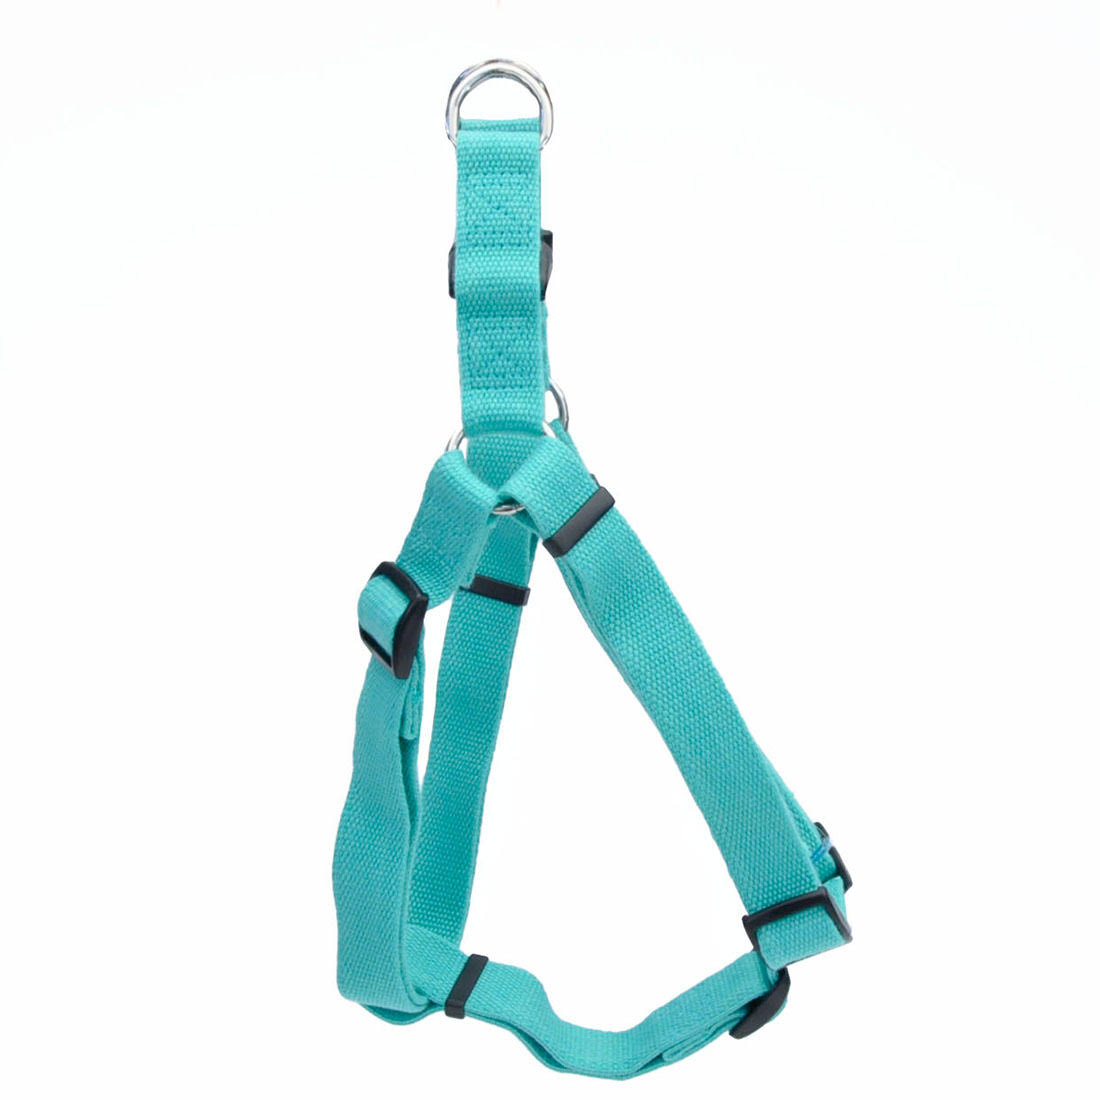 New Earth Soy Comfort Wrap Adjustable Dog Harness, Mint, 5/8-in X 16-25-in